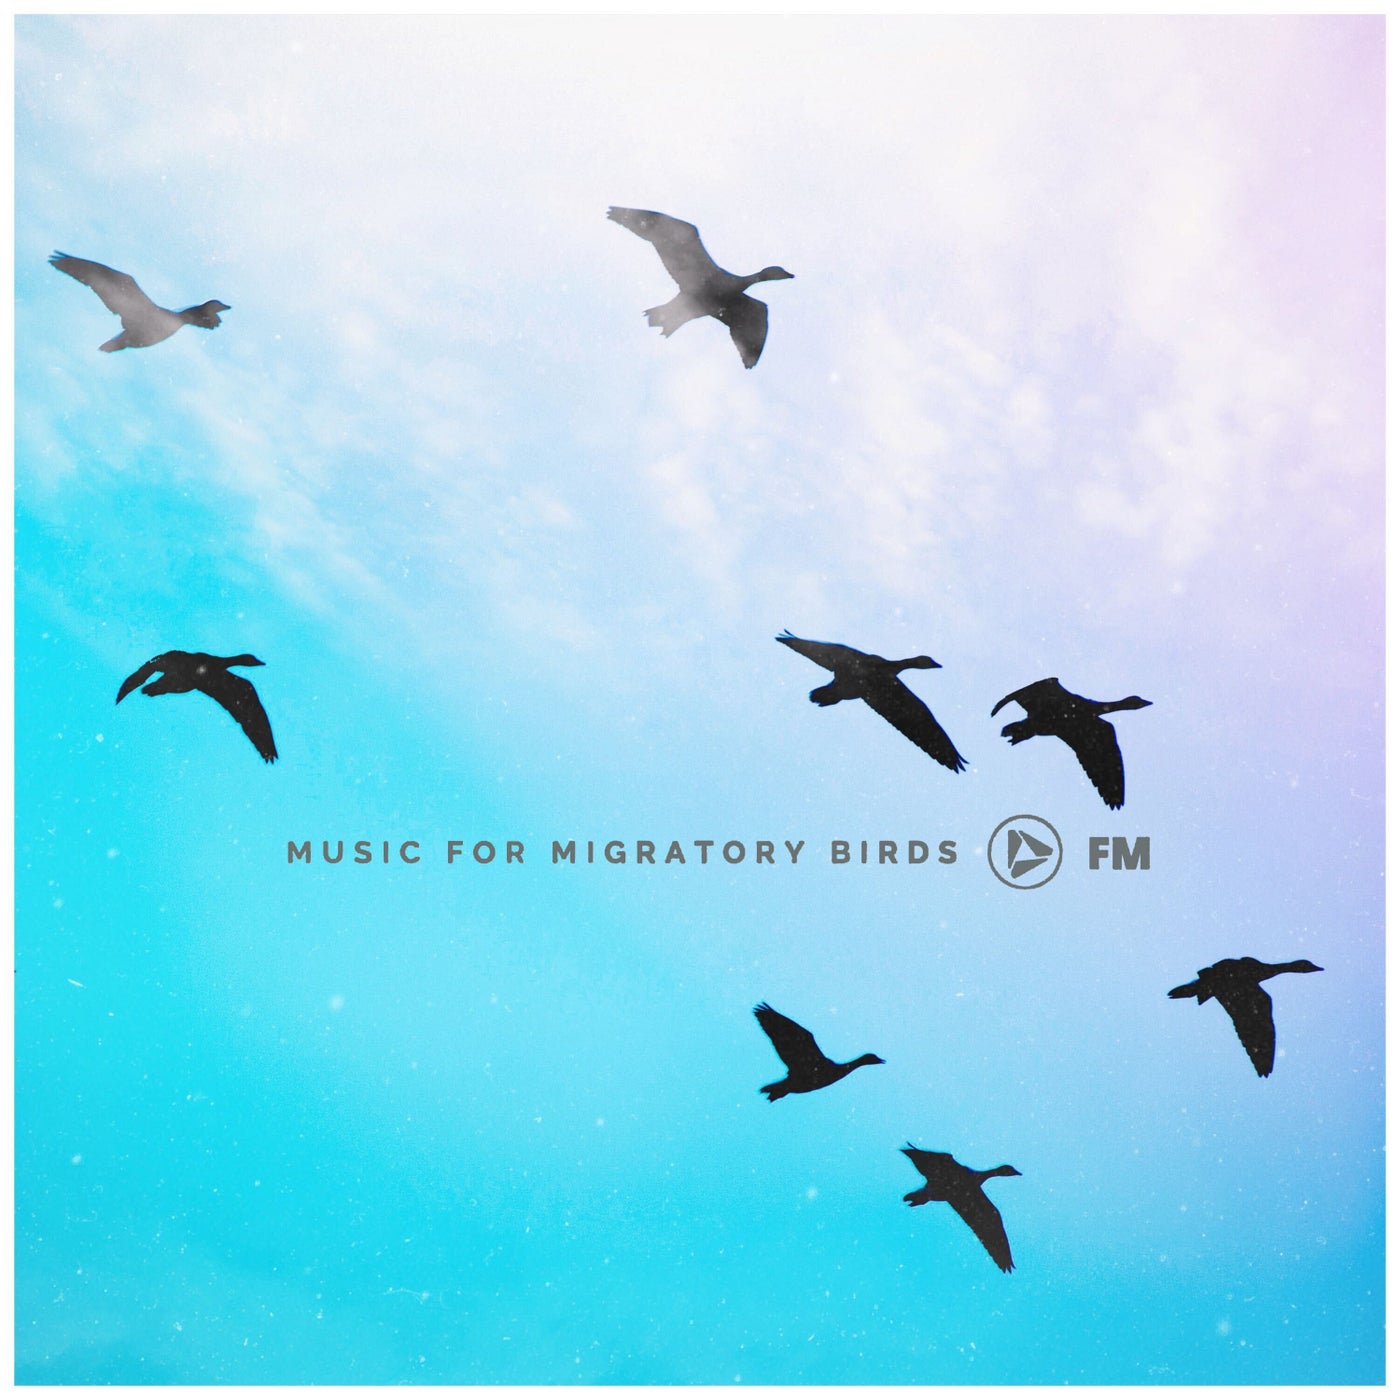 Music for Migratory Birds